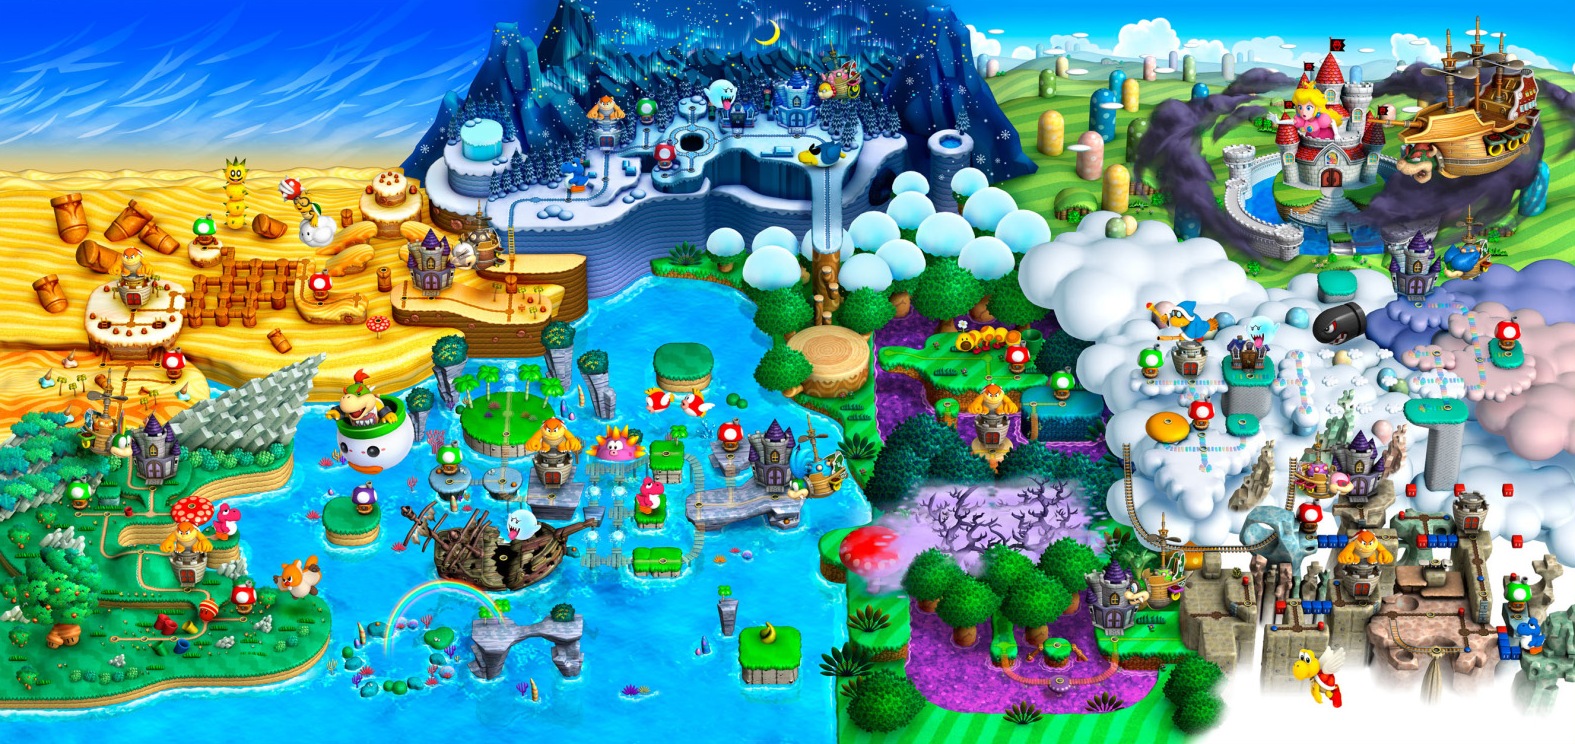 Download Latest HD Wallpaper of, Games, New Super Mario Bros. Wii